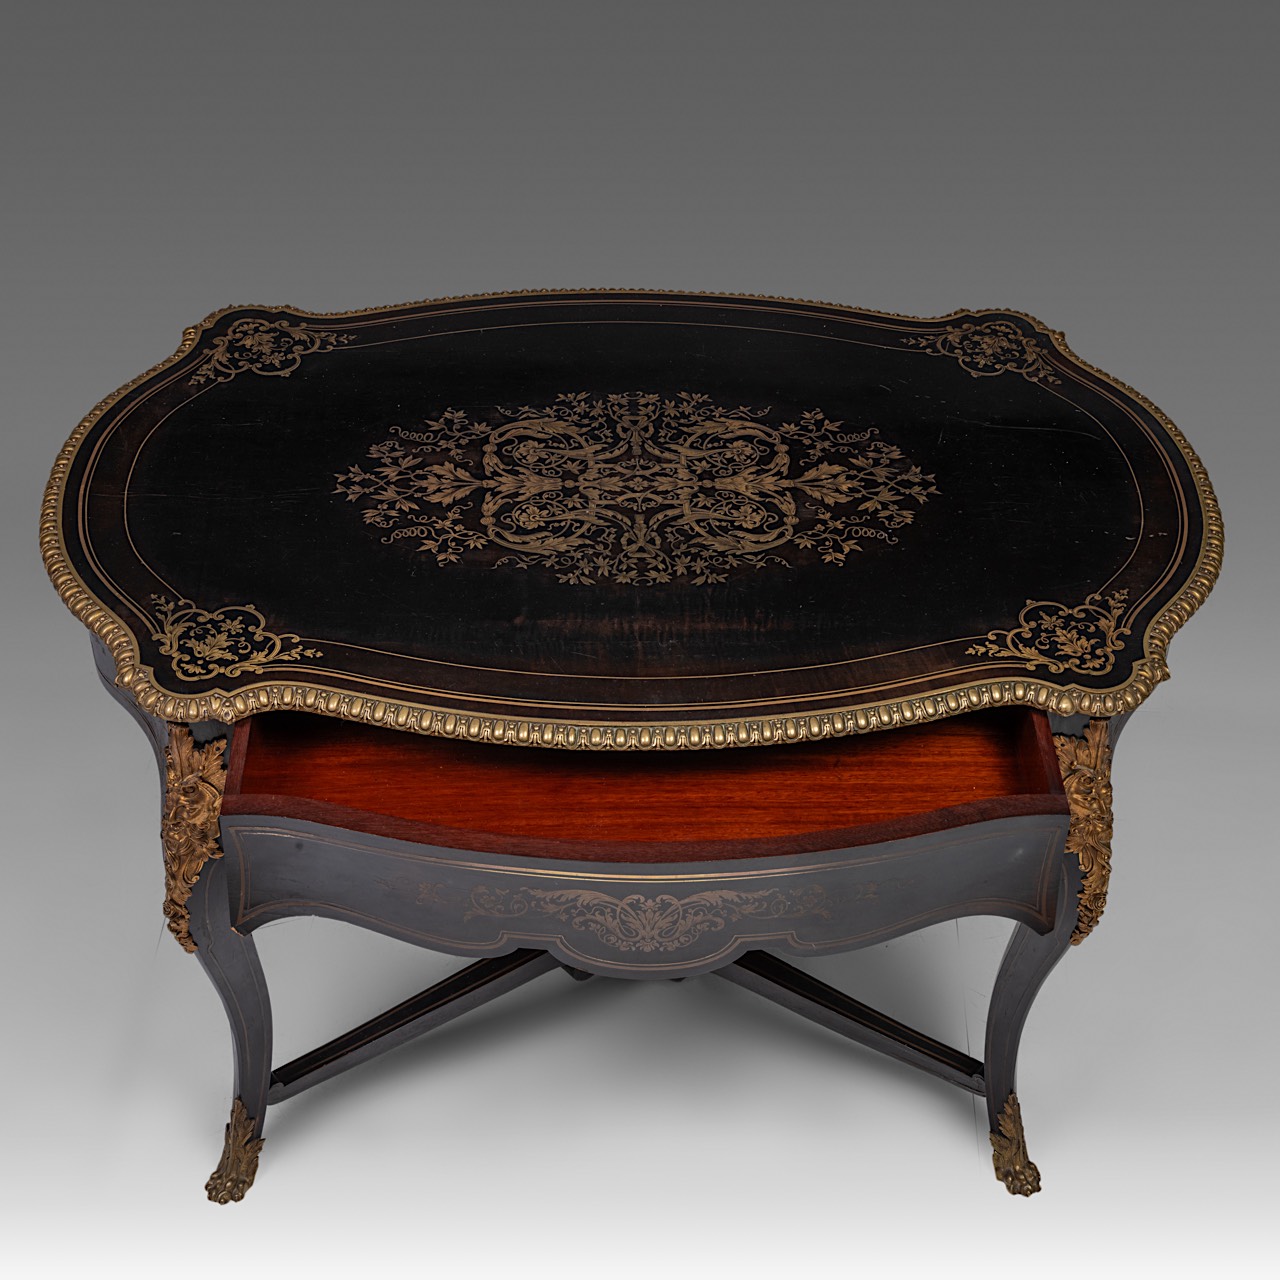 A Napoleon III (1852-1870) Boulle centre table, stamped 'HPR' Henri Picard (1840-1890), H 75 - W 120 - Image 6 of 10